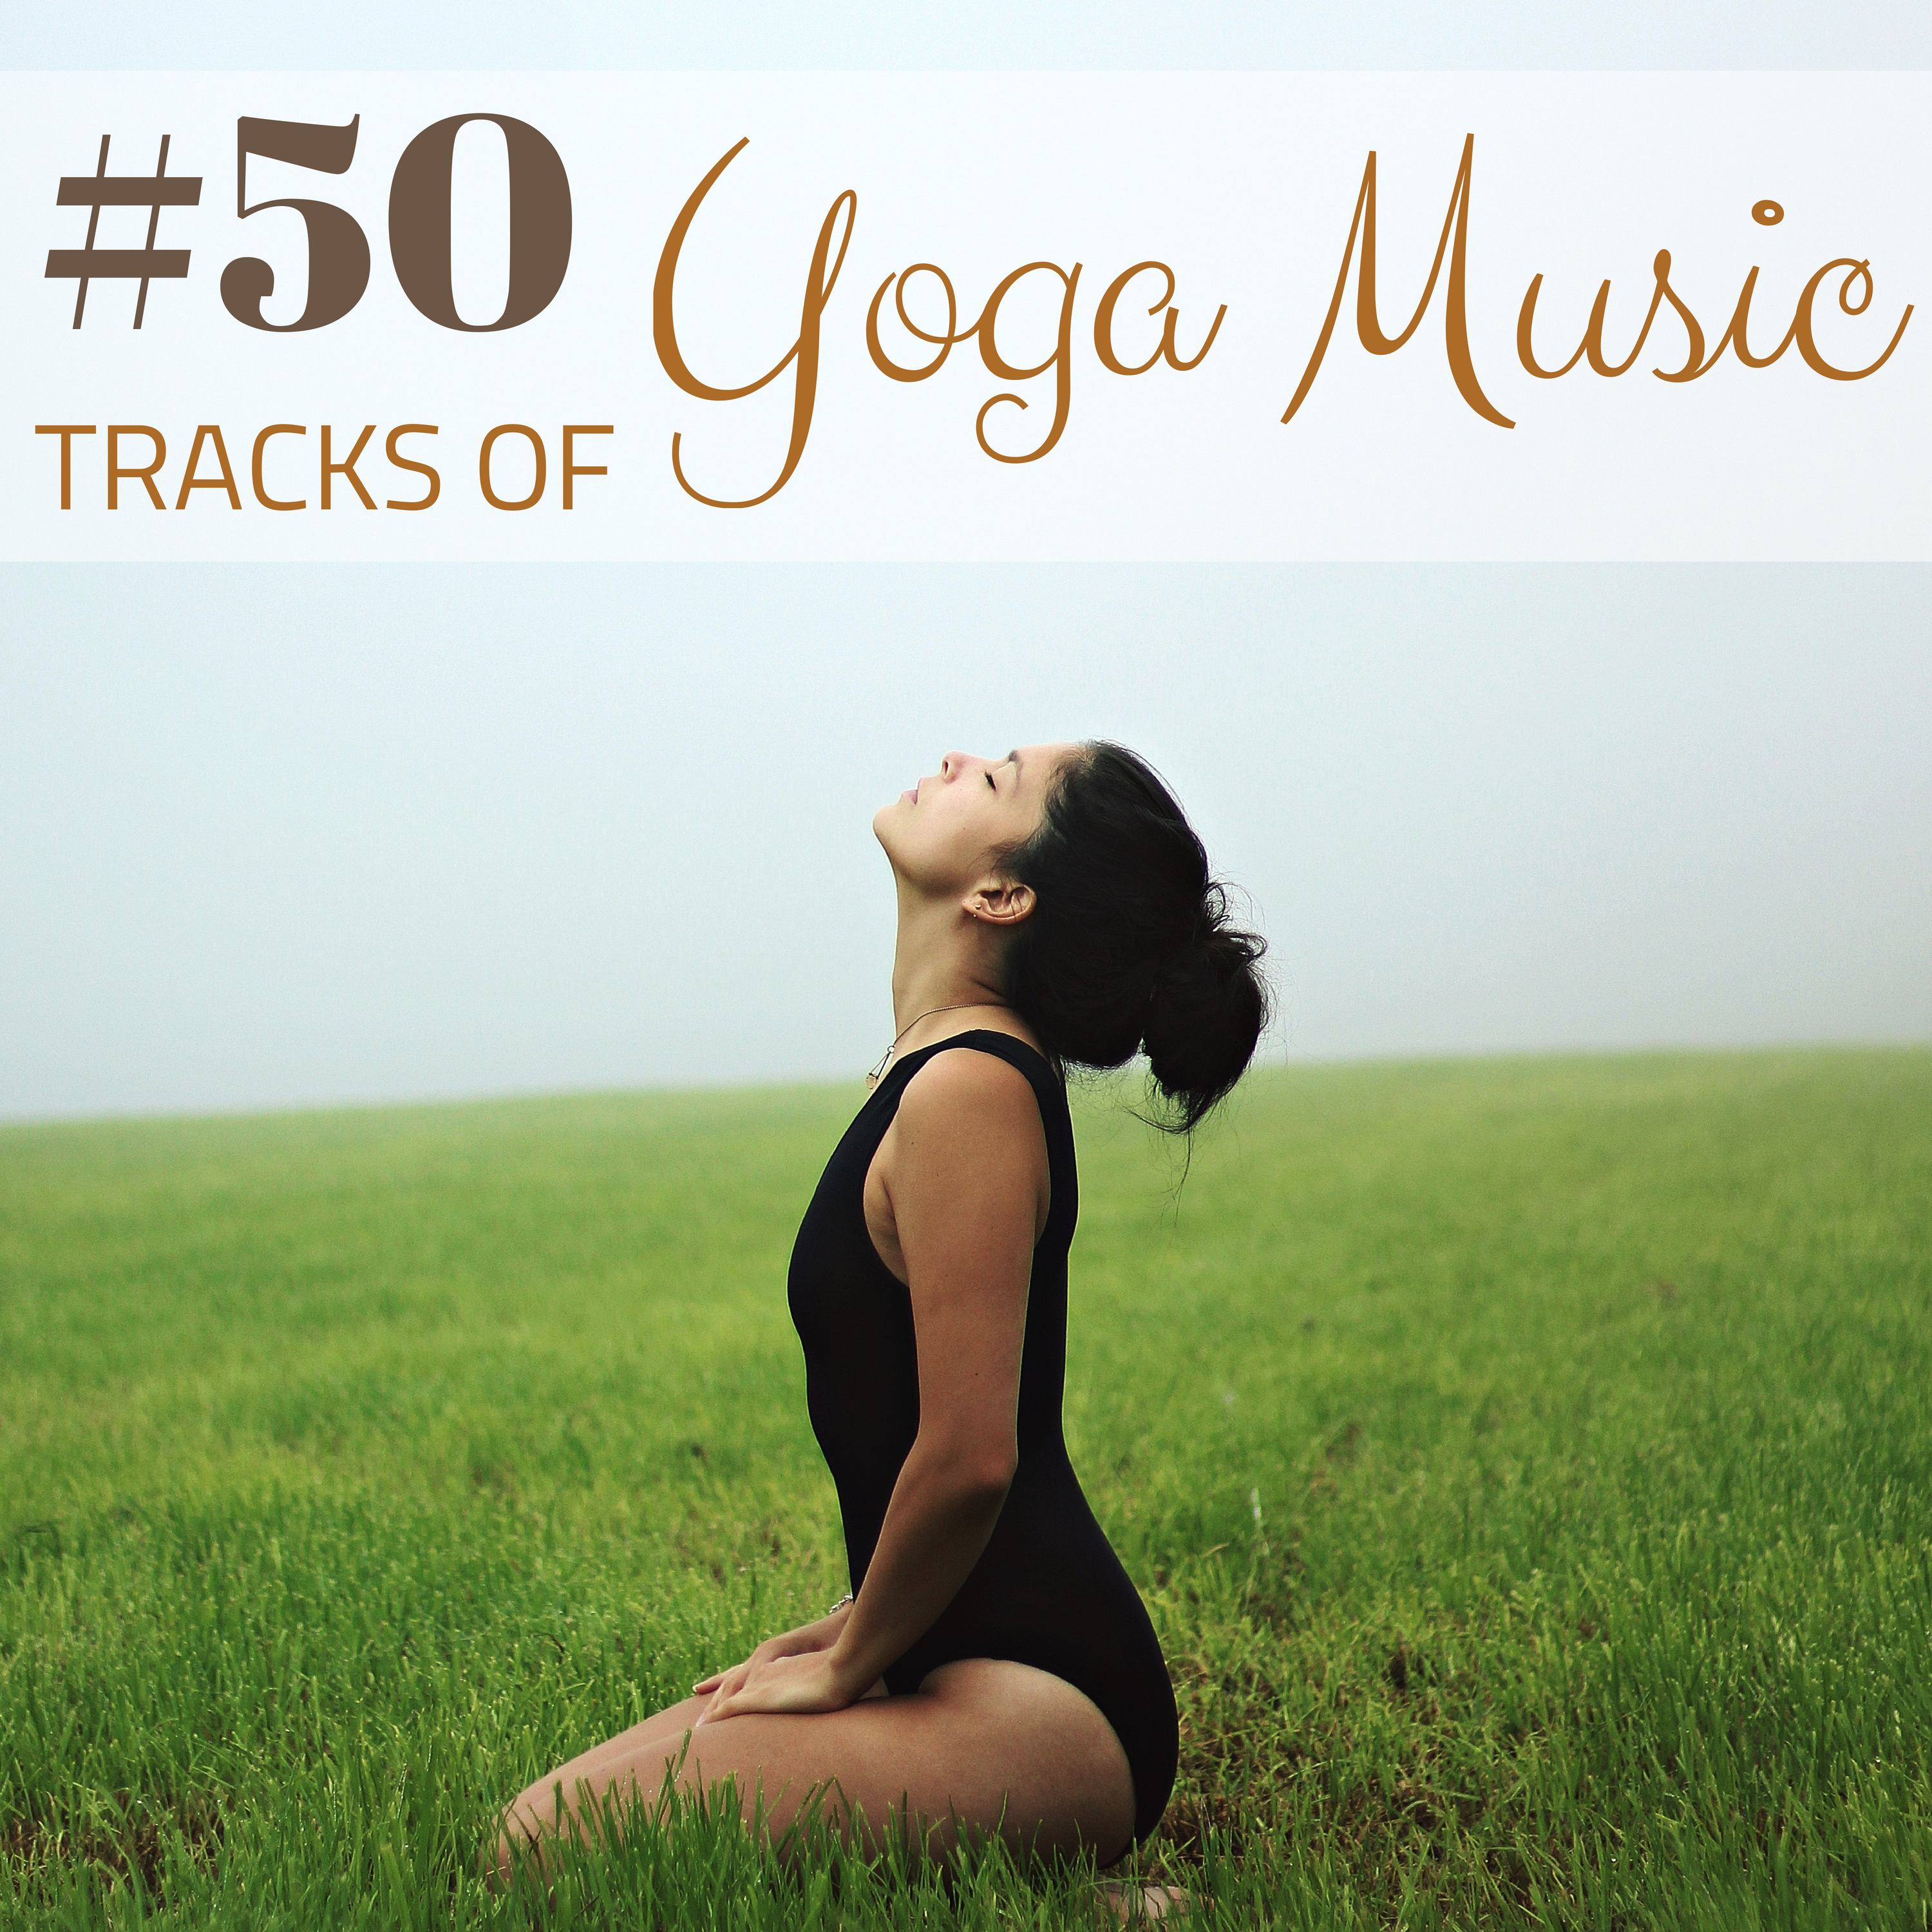 #50 Tracks of Yoga Music - Perfect Zen Songs for Buddhist Meditation, Best Soothing Nature Tracks